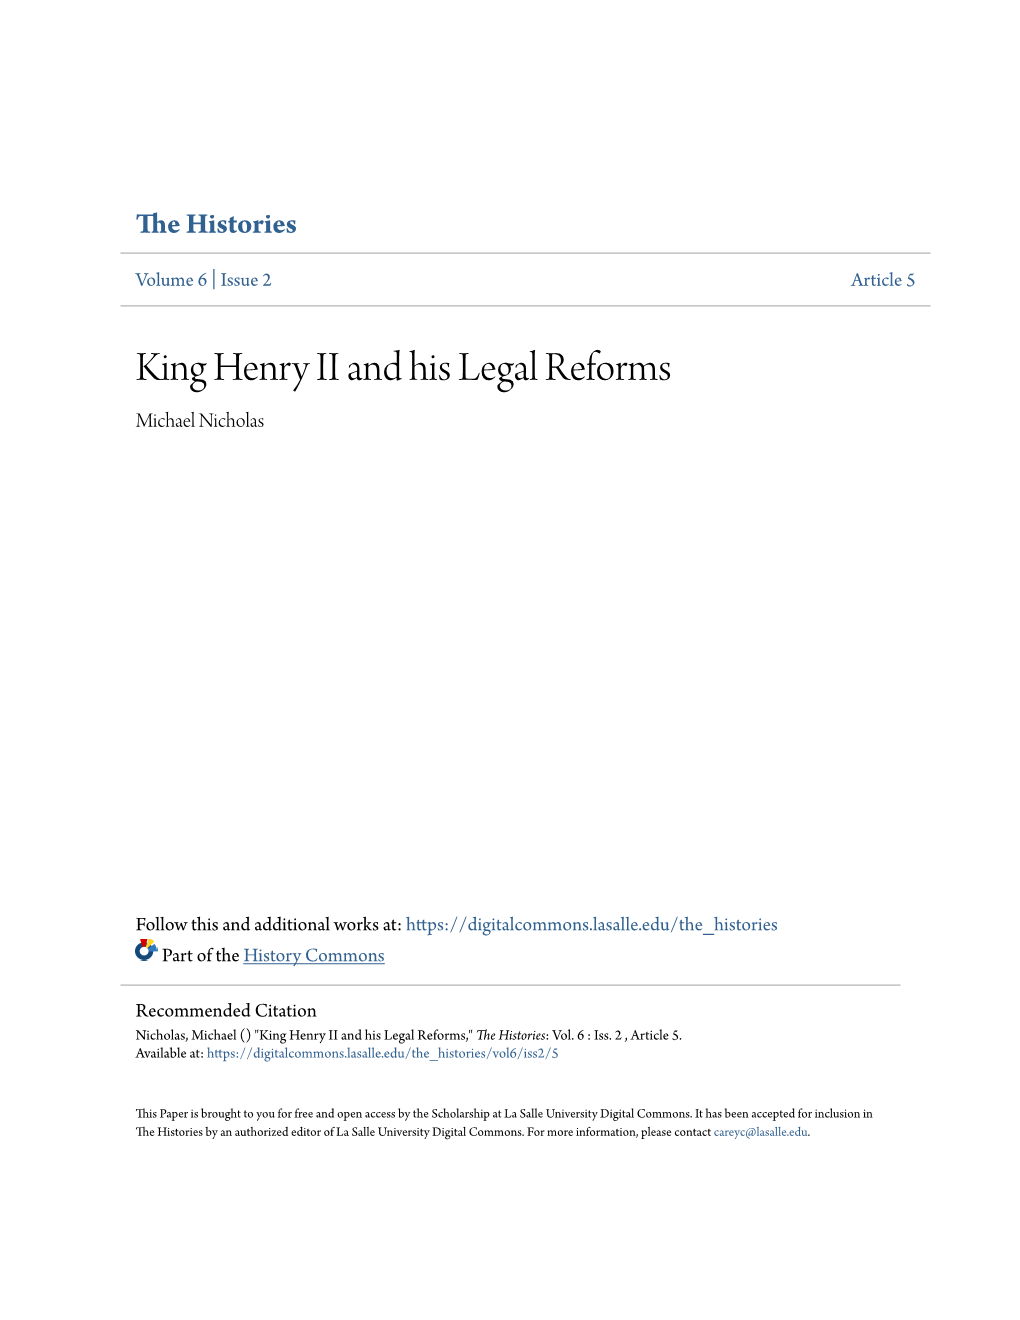 King Henry II and His Legal Reforms Michael Nicholas